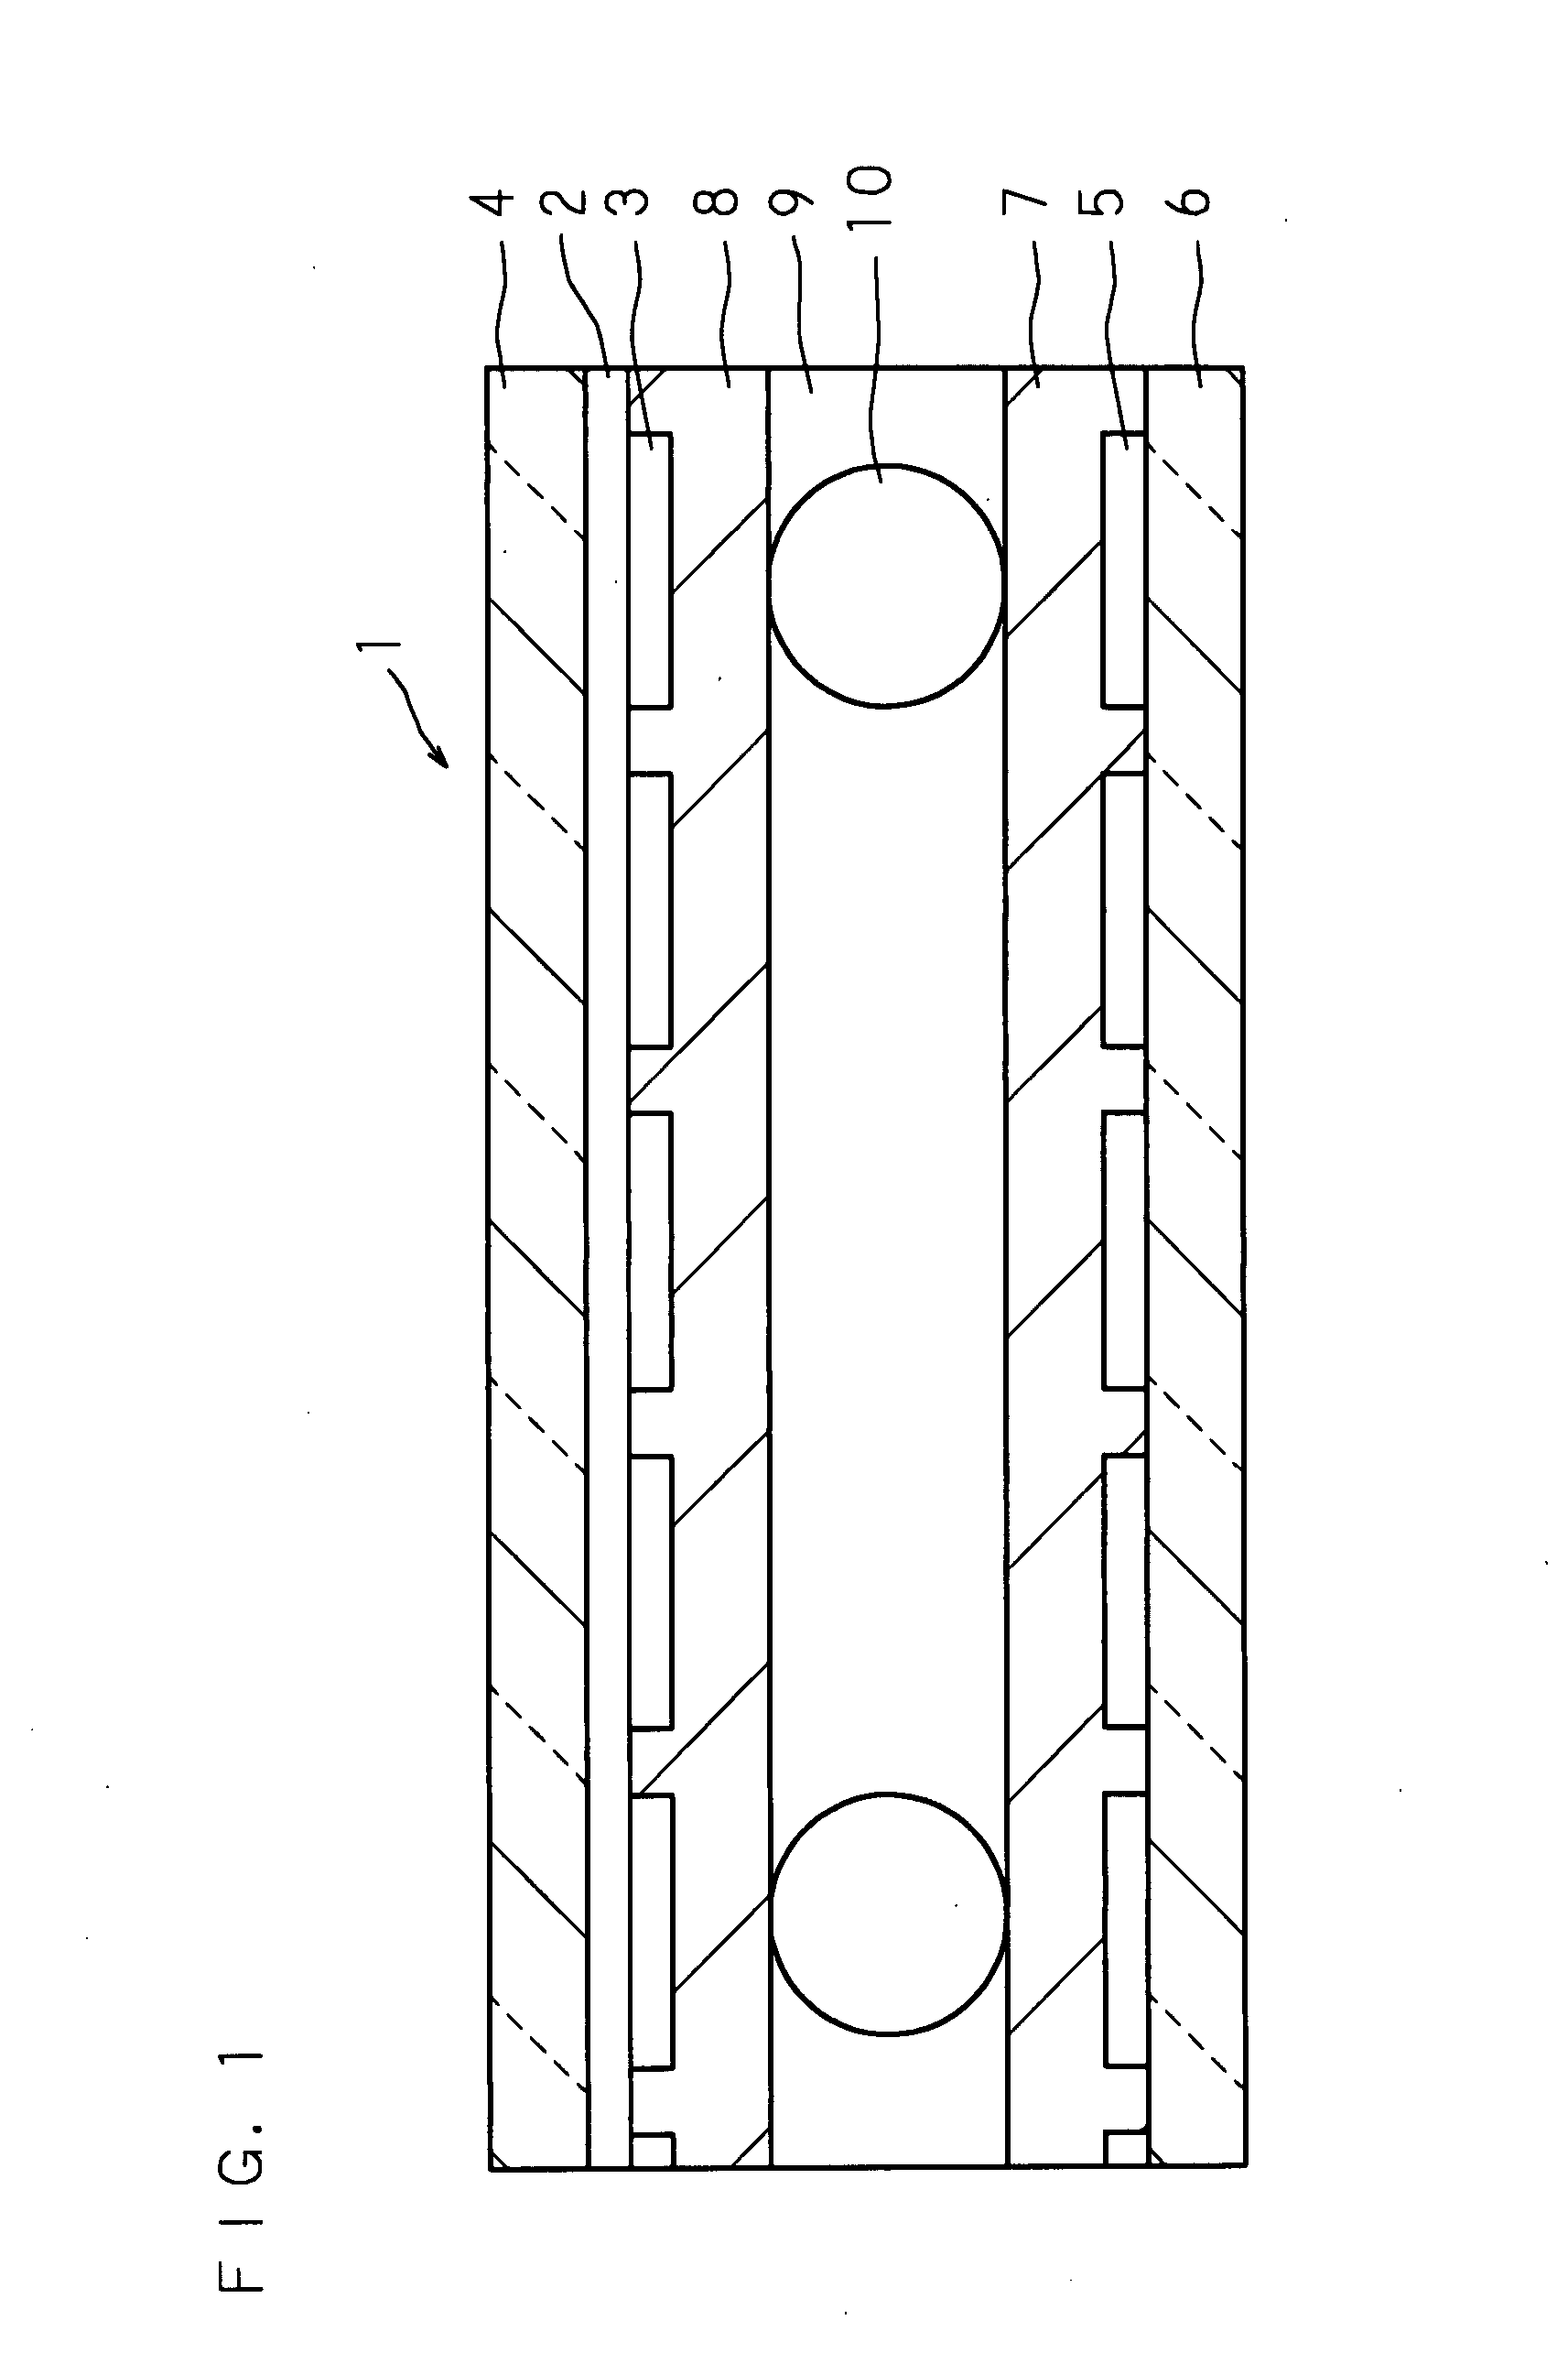 Liquid crystal display device and alignment process method